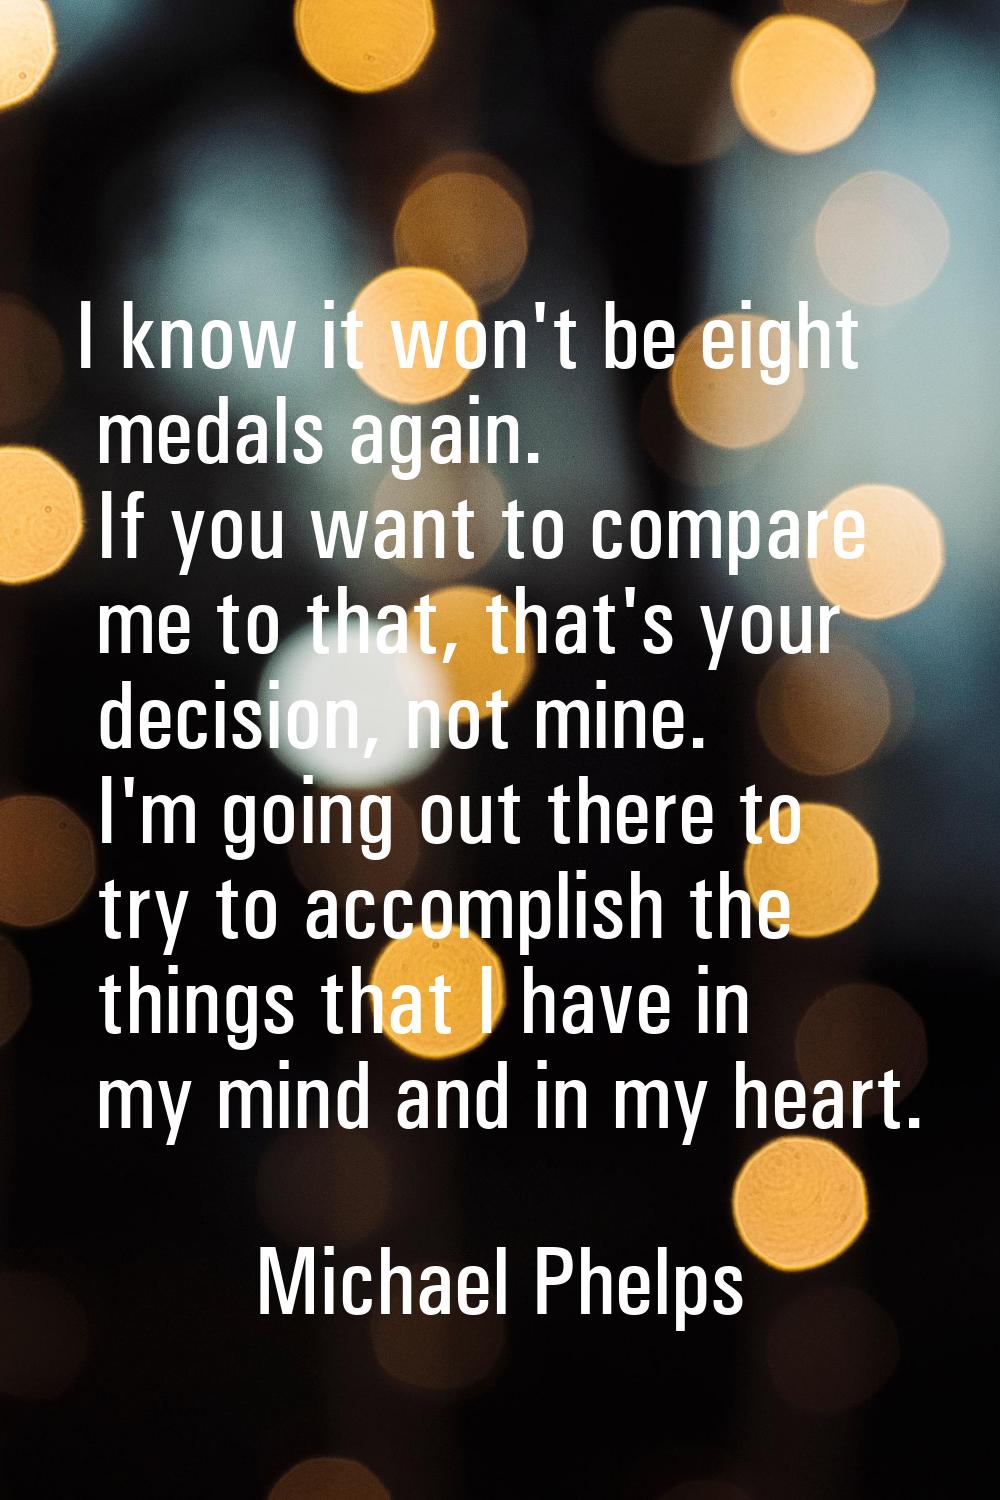 I know it won't be eight medals again. If you want to compare me to that, that's your decision, not